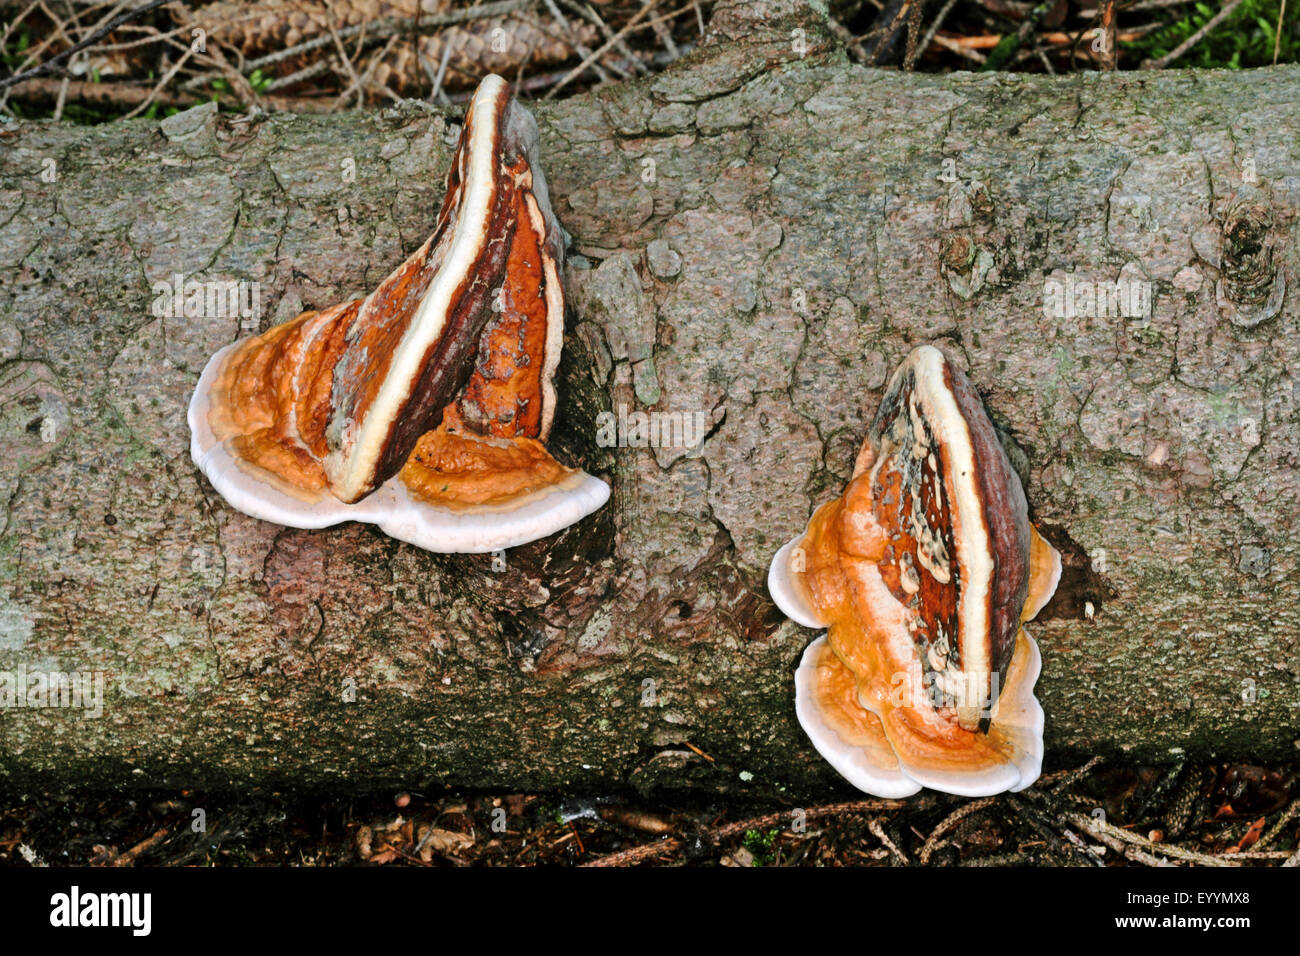 Red Banded Polypore, Red-banded Polypore, Red belted Bracket, Red-belted Bracket (Fomitopsis pinicola, Fomes pinicola, Fomes marginatus), fruiting bodies at a tree trunk, Germany Stock Photo